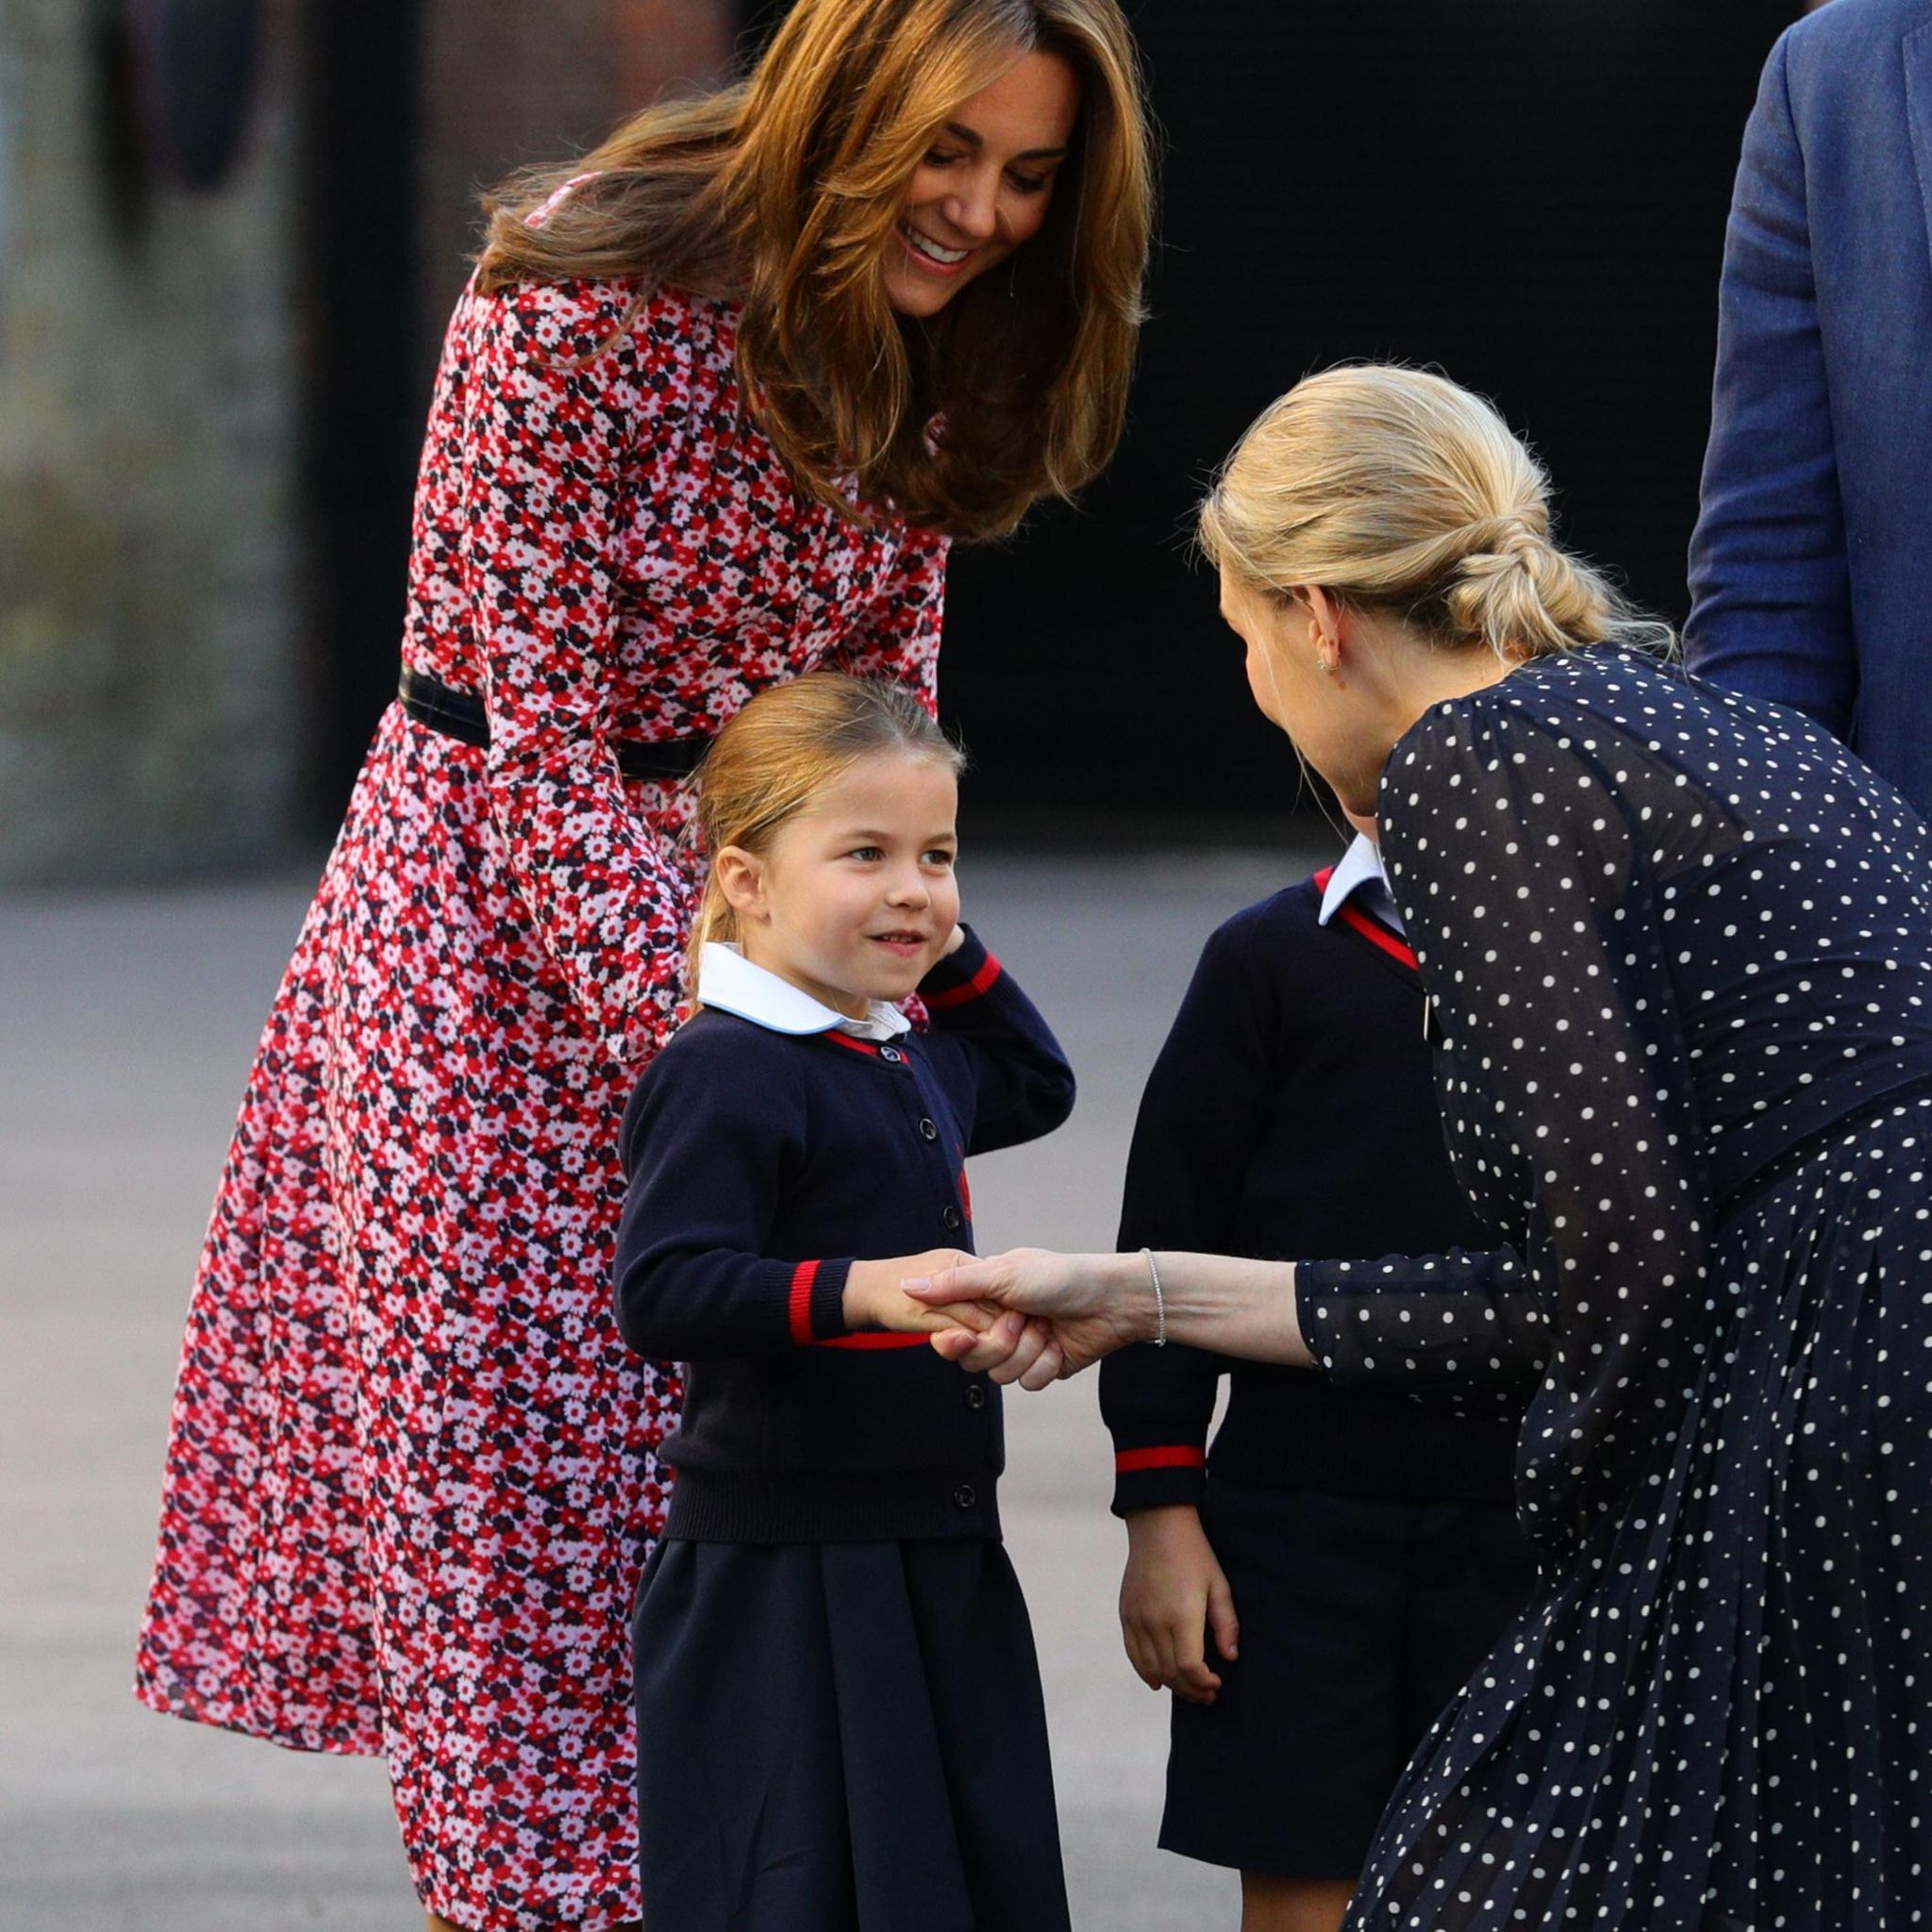 Princess Charlotte is greeted by Helen Haslem, head of the lower school at Thomas's Battersea, on her first day of school